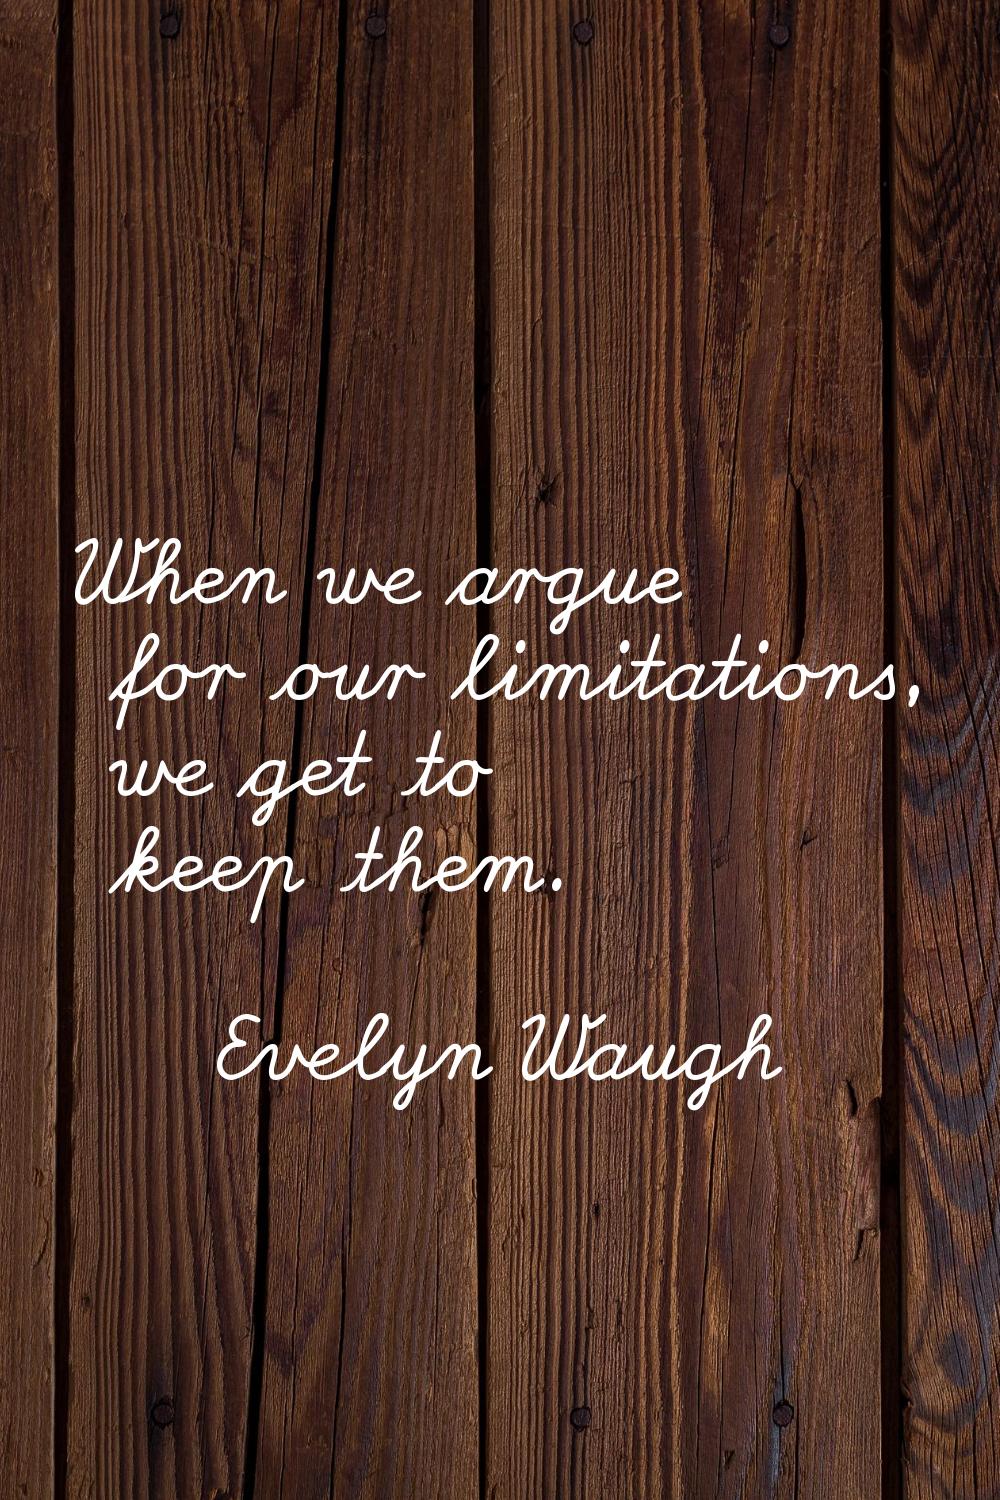 When we argue for our limitations, we get to keep them.